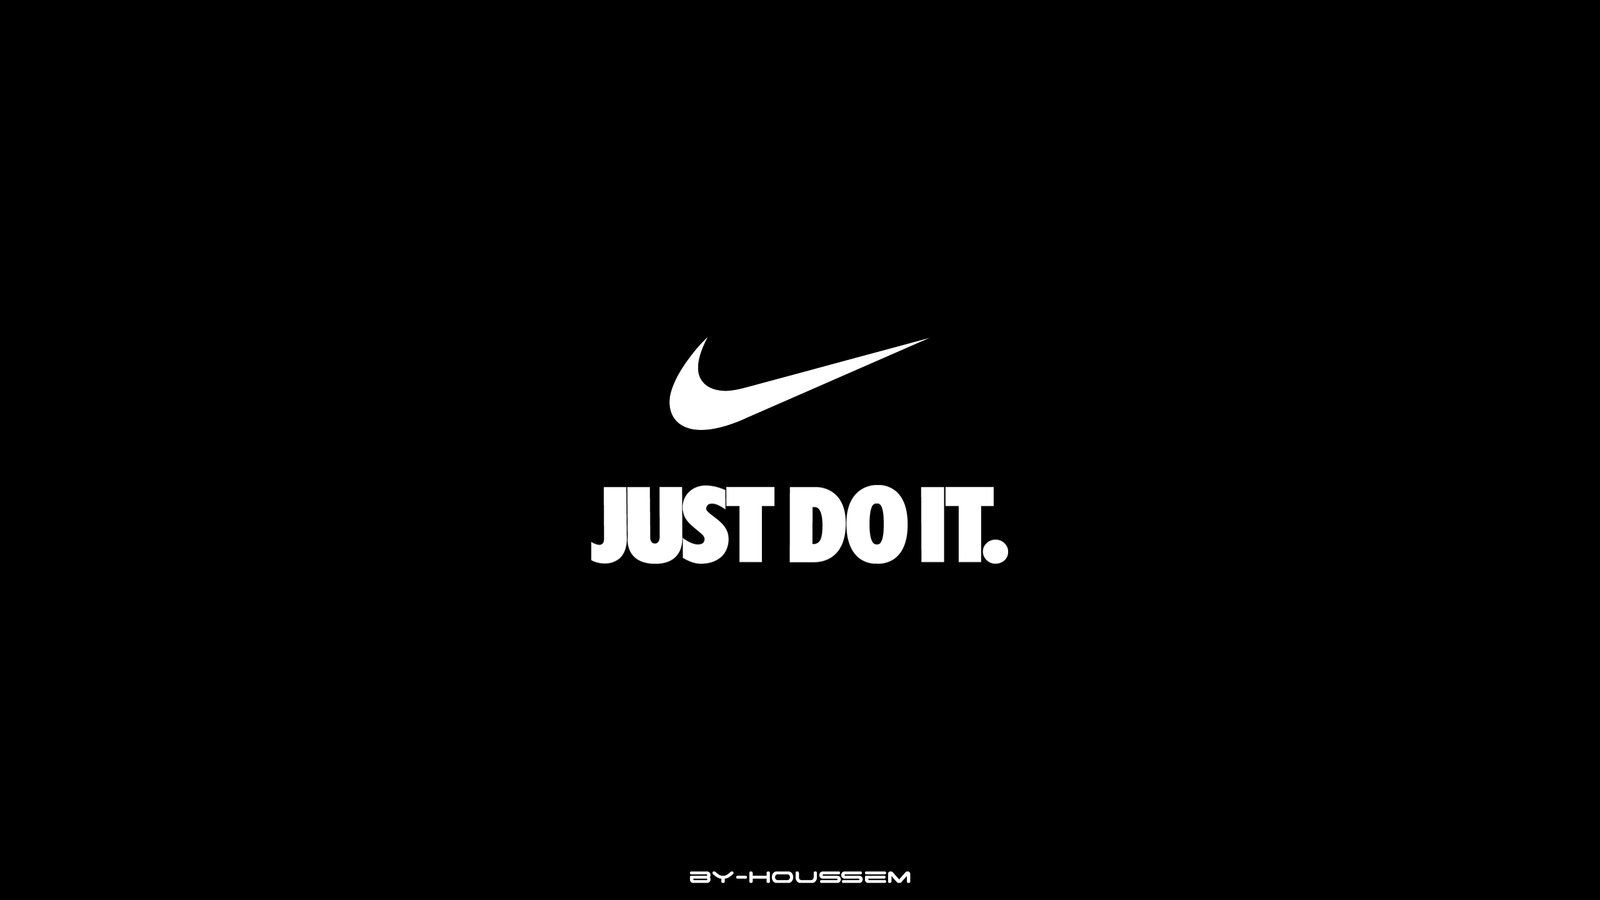 Nike wallpaper just do it just do it wallpapers nike wallpaper nike wallpaper backgrounds